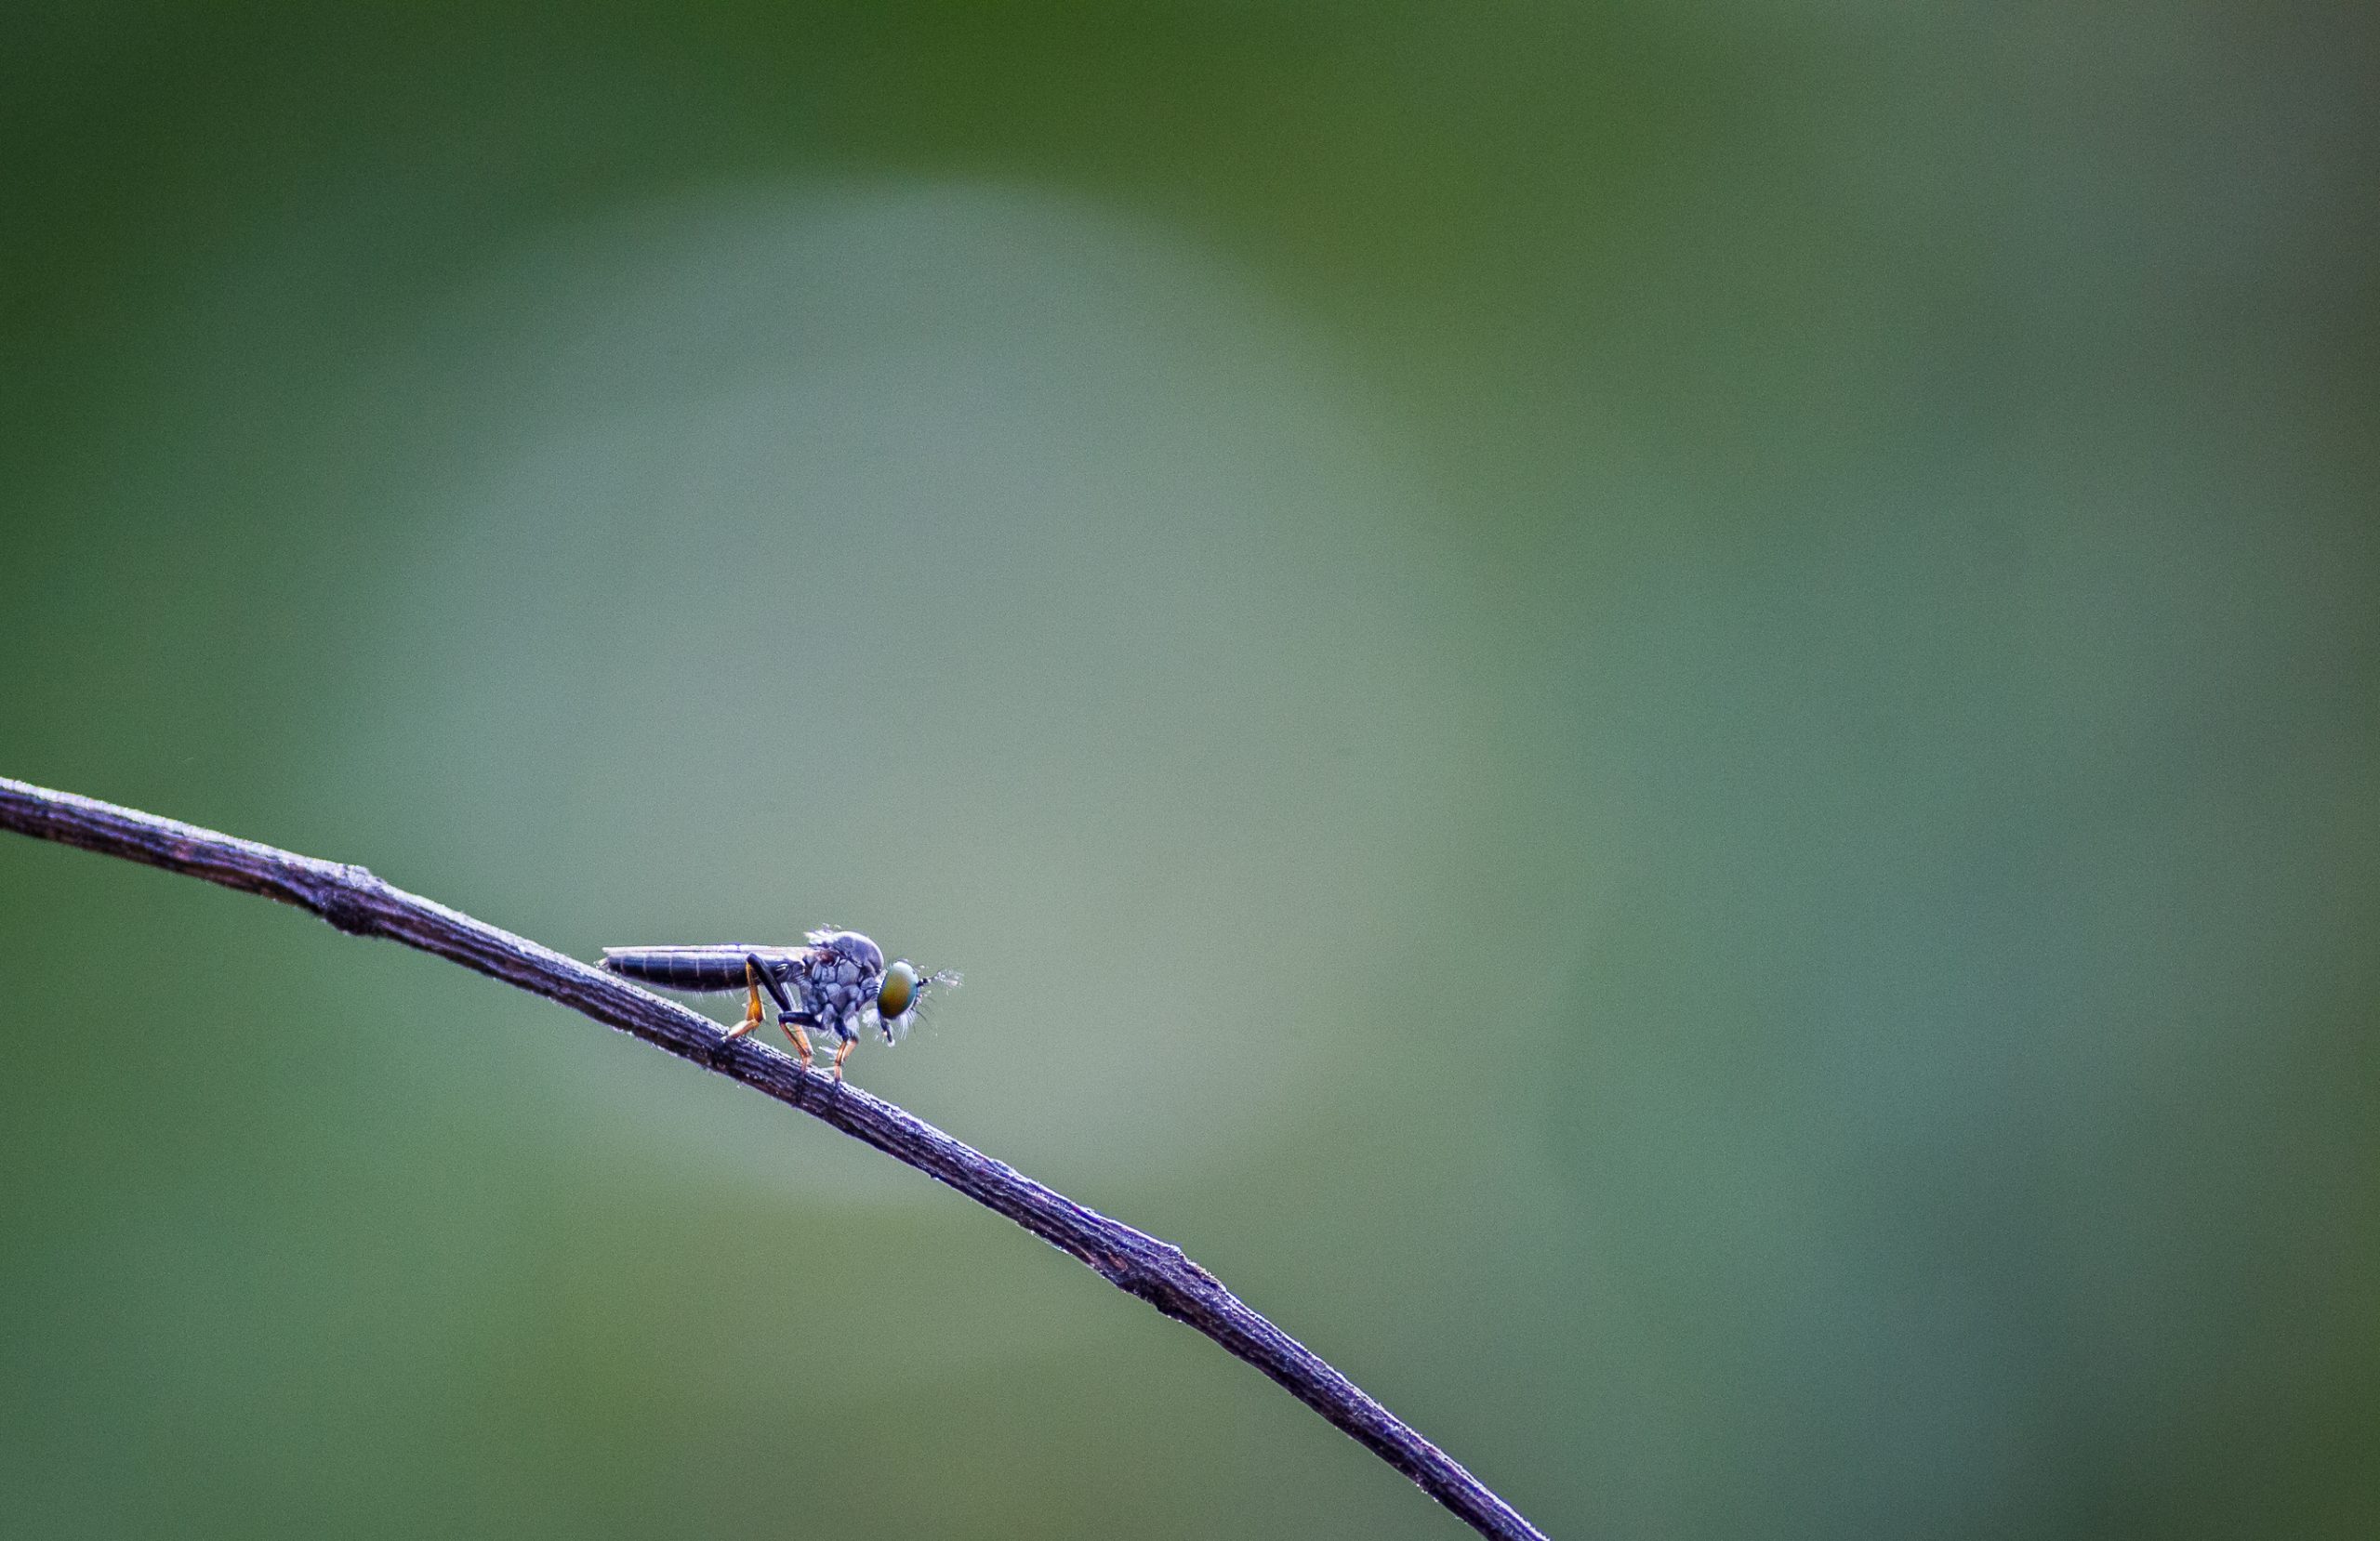 Insect on twig